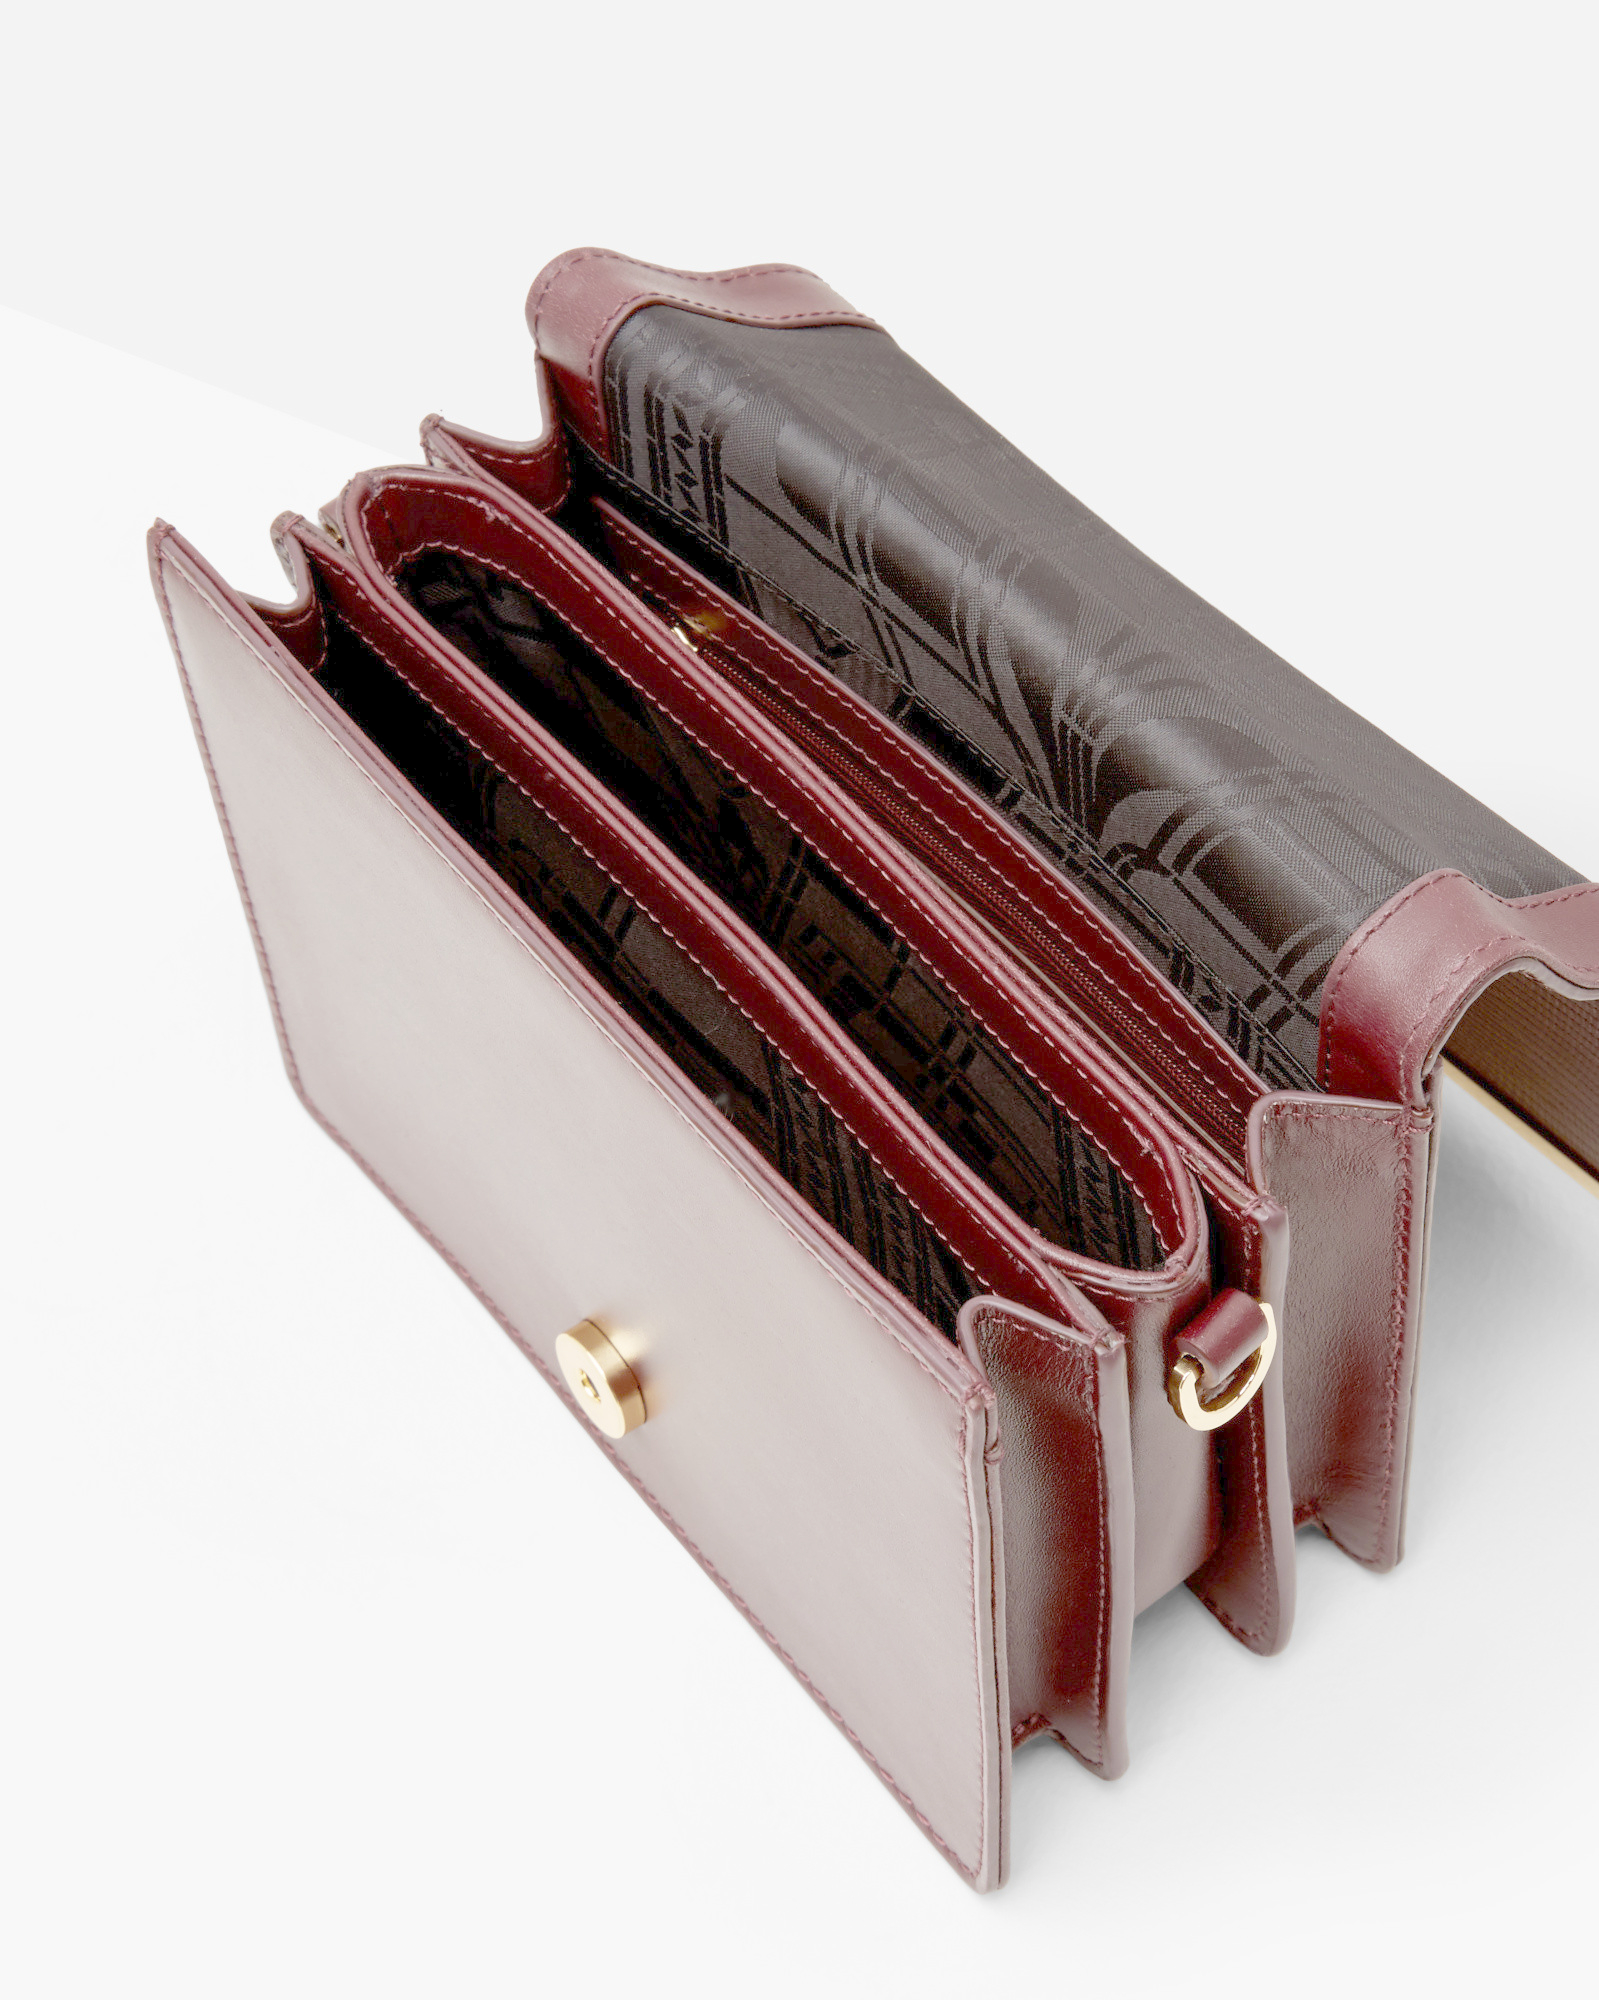 Ted Baker Exotic Leather Cross Body Bag in Maroon (Brown) - Lyst